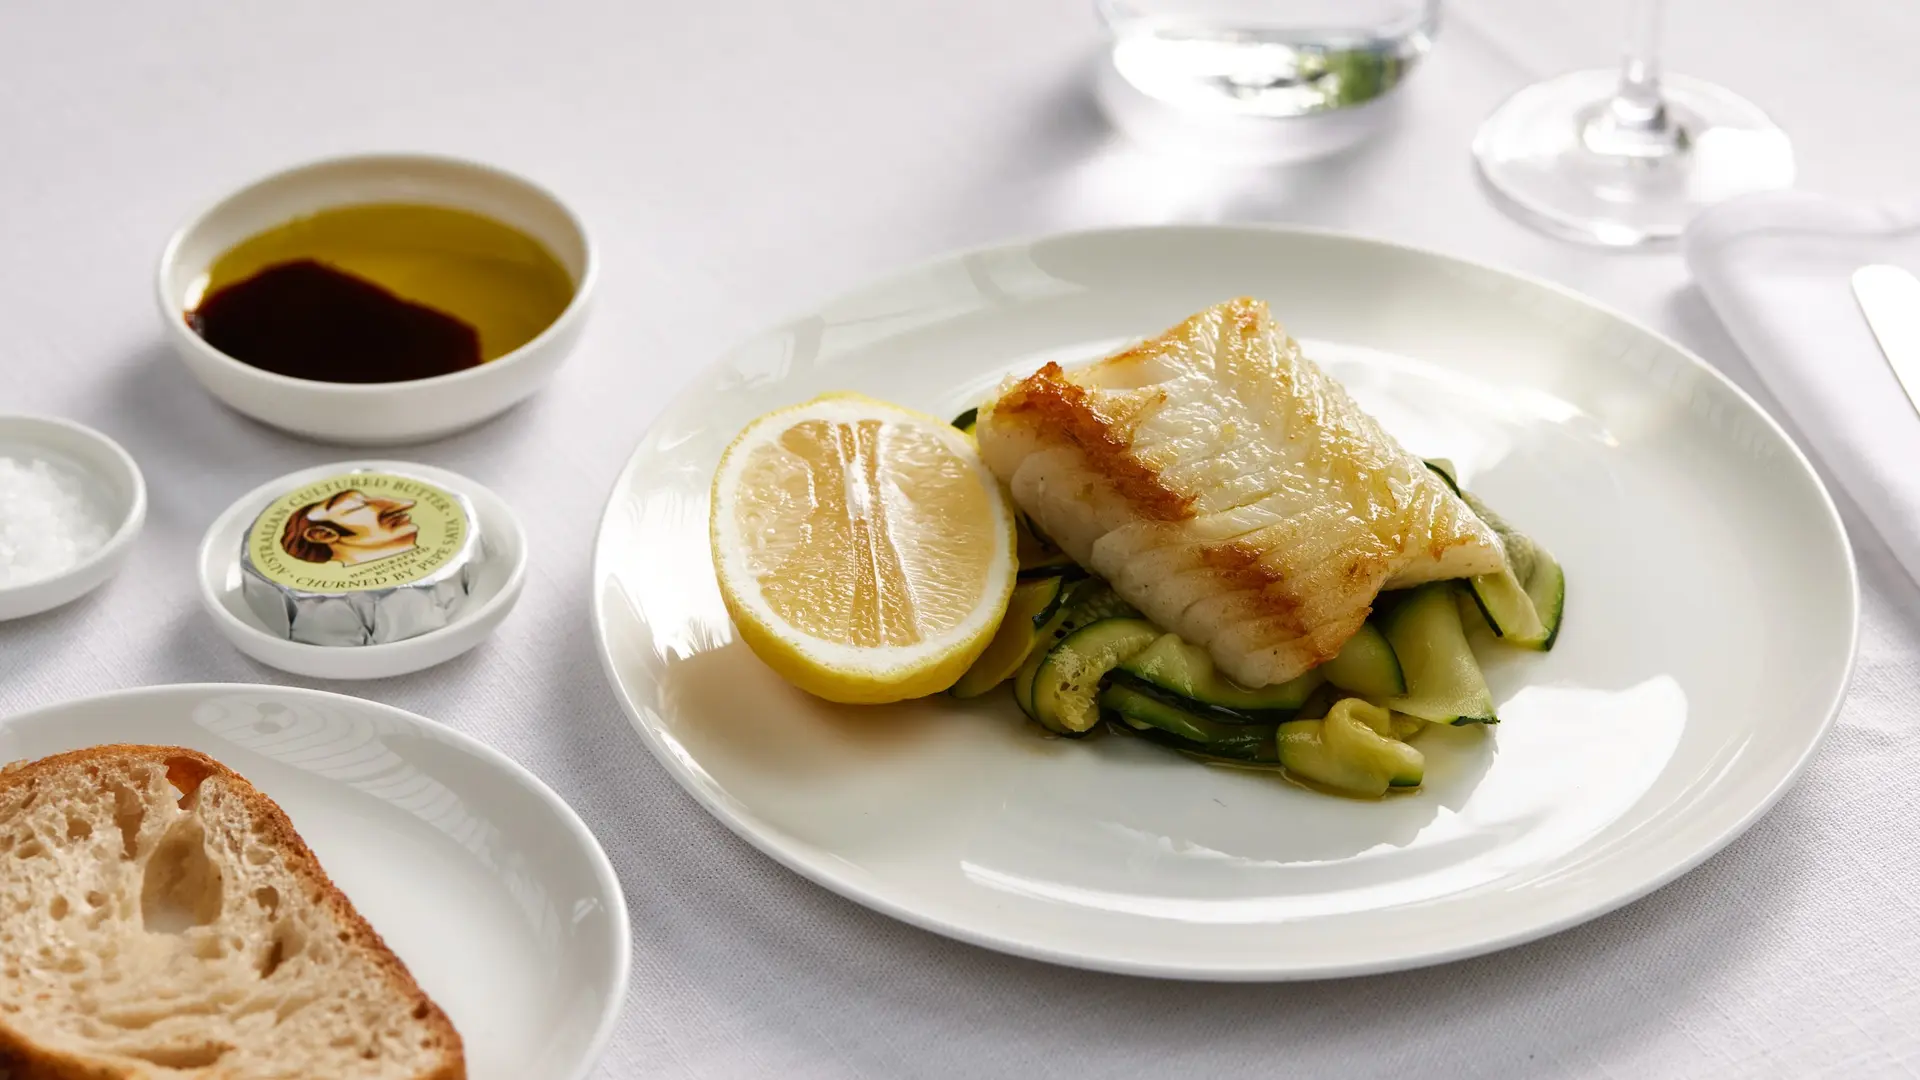 Airlines News - Qantas - larger portions & new menus - inflight & lounges